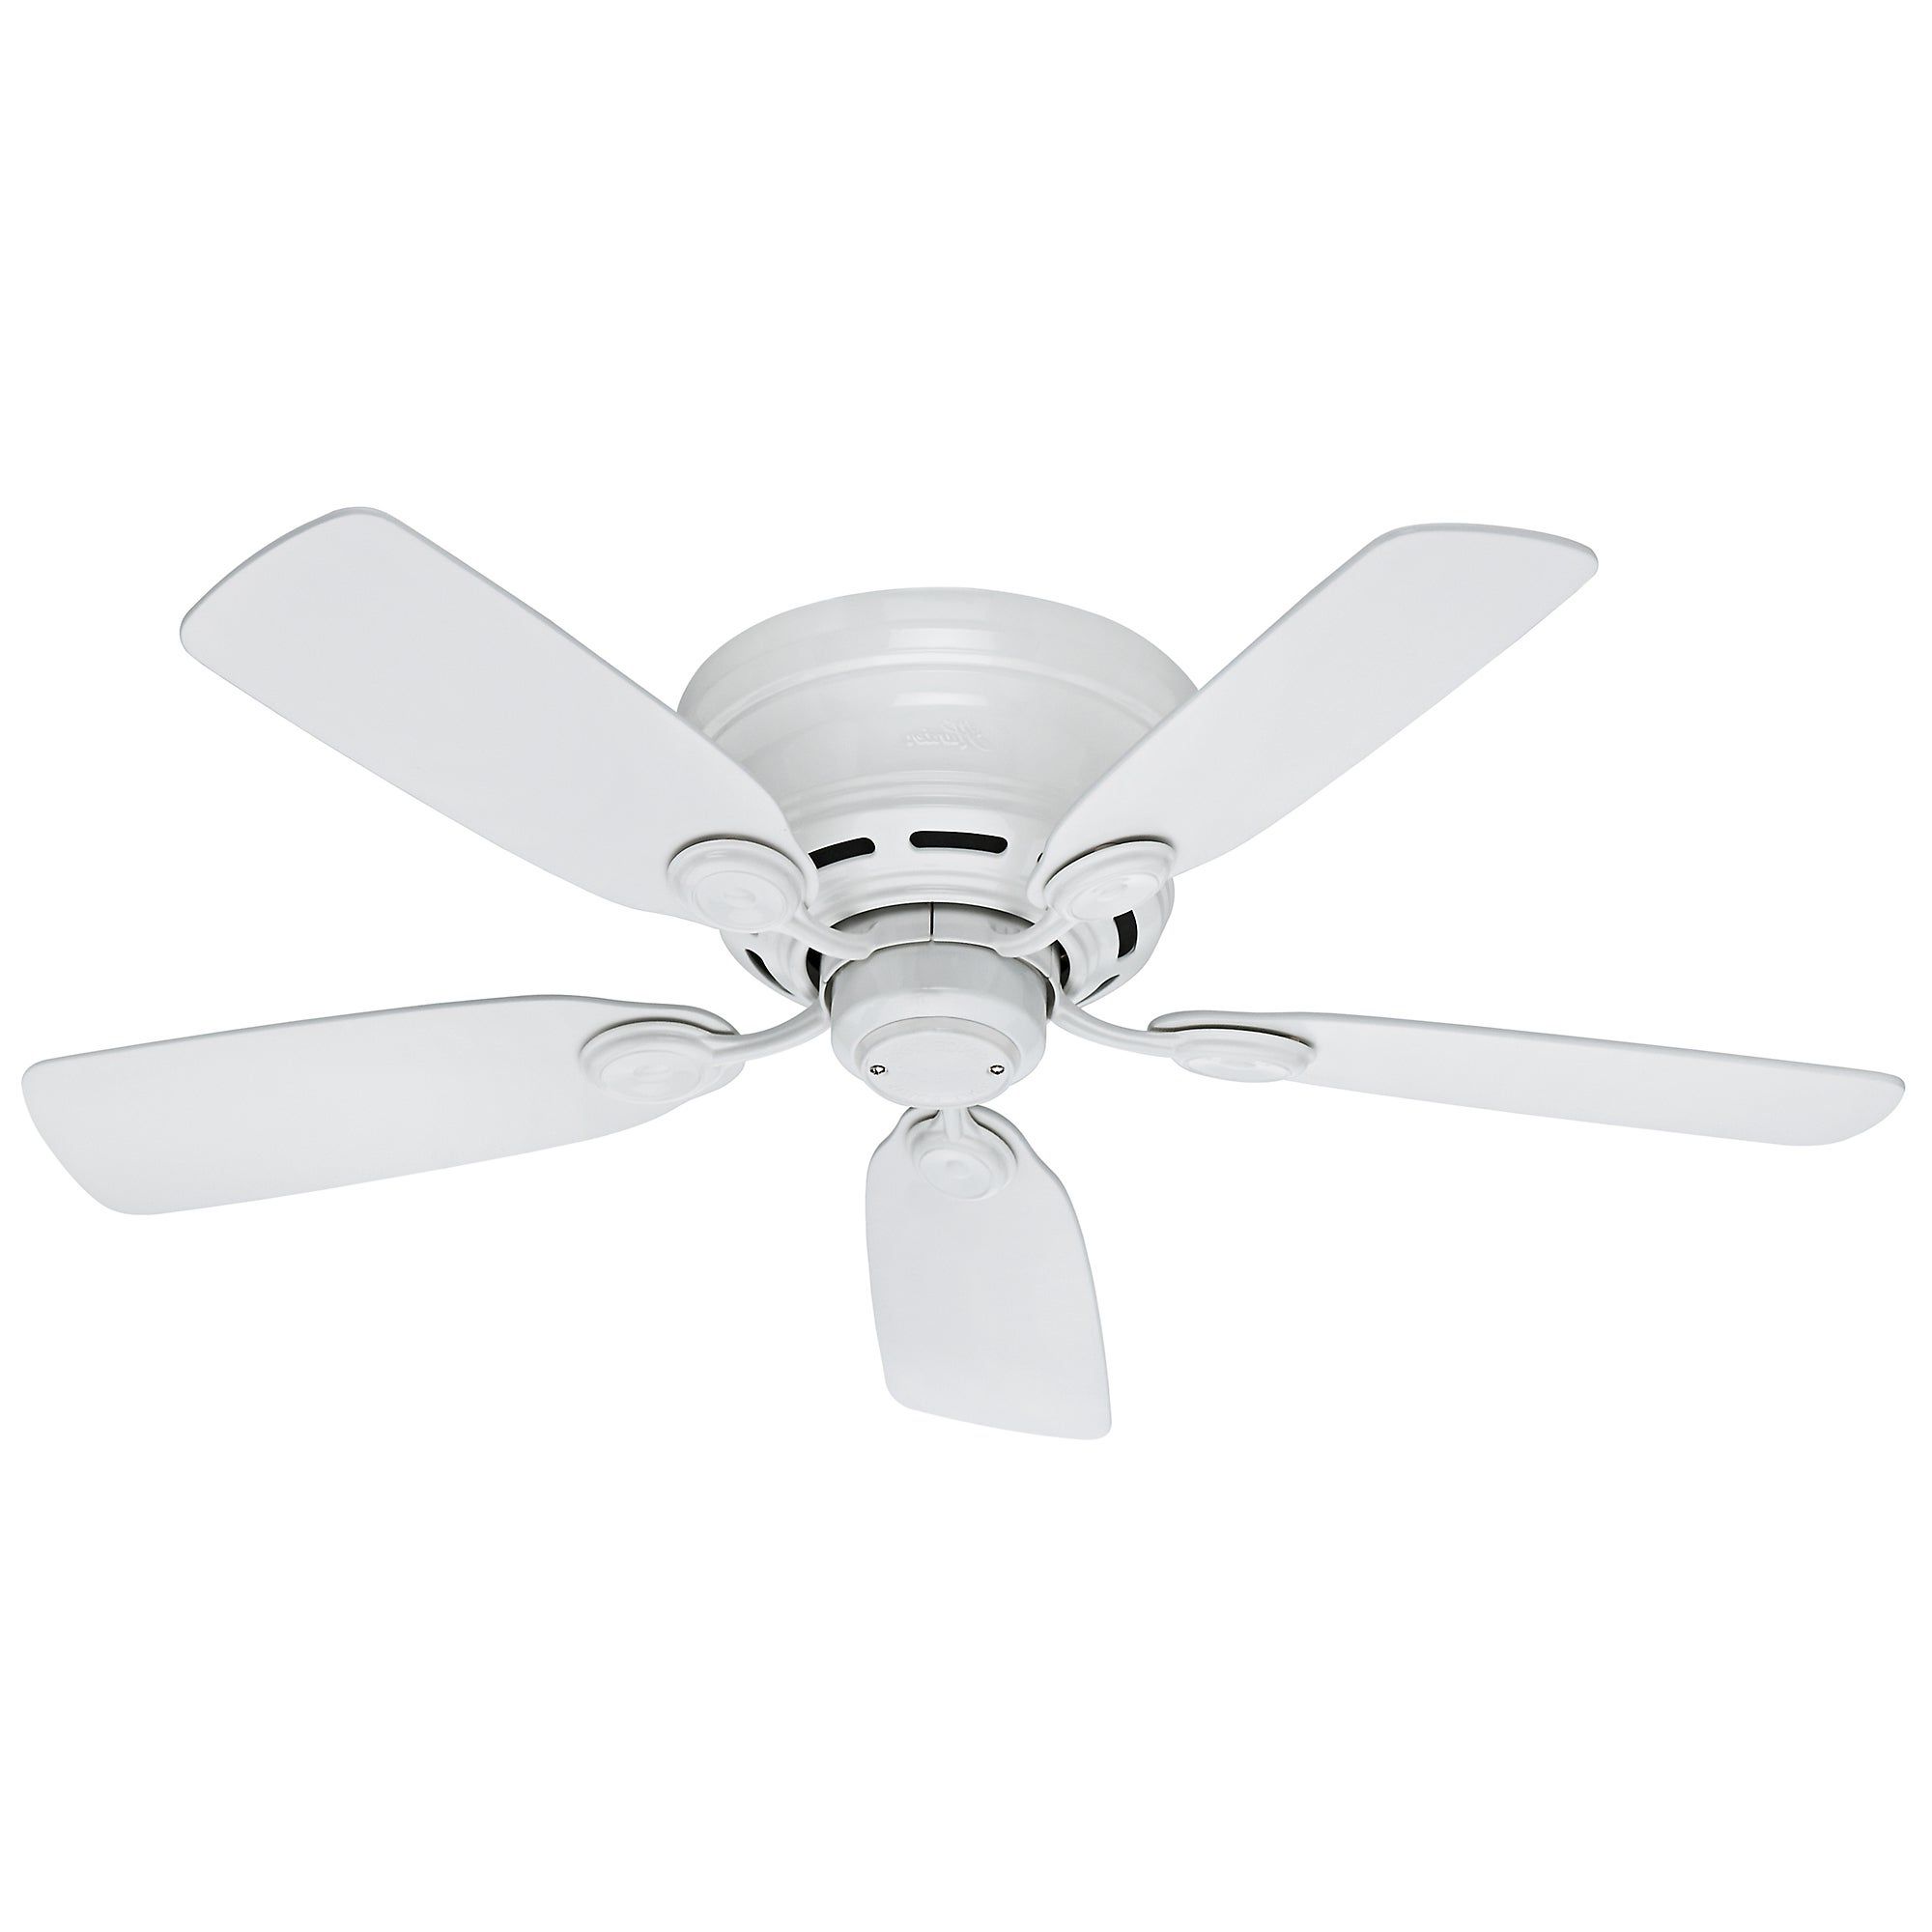 Hunter Low Profile 5 Blade Ceiling Fans Throughout Most Up To Date Hunter Low Profile 42 Inch White 5 Blade Ceiling Fan (View 10 of 20)